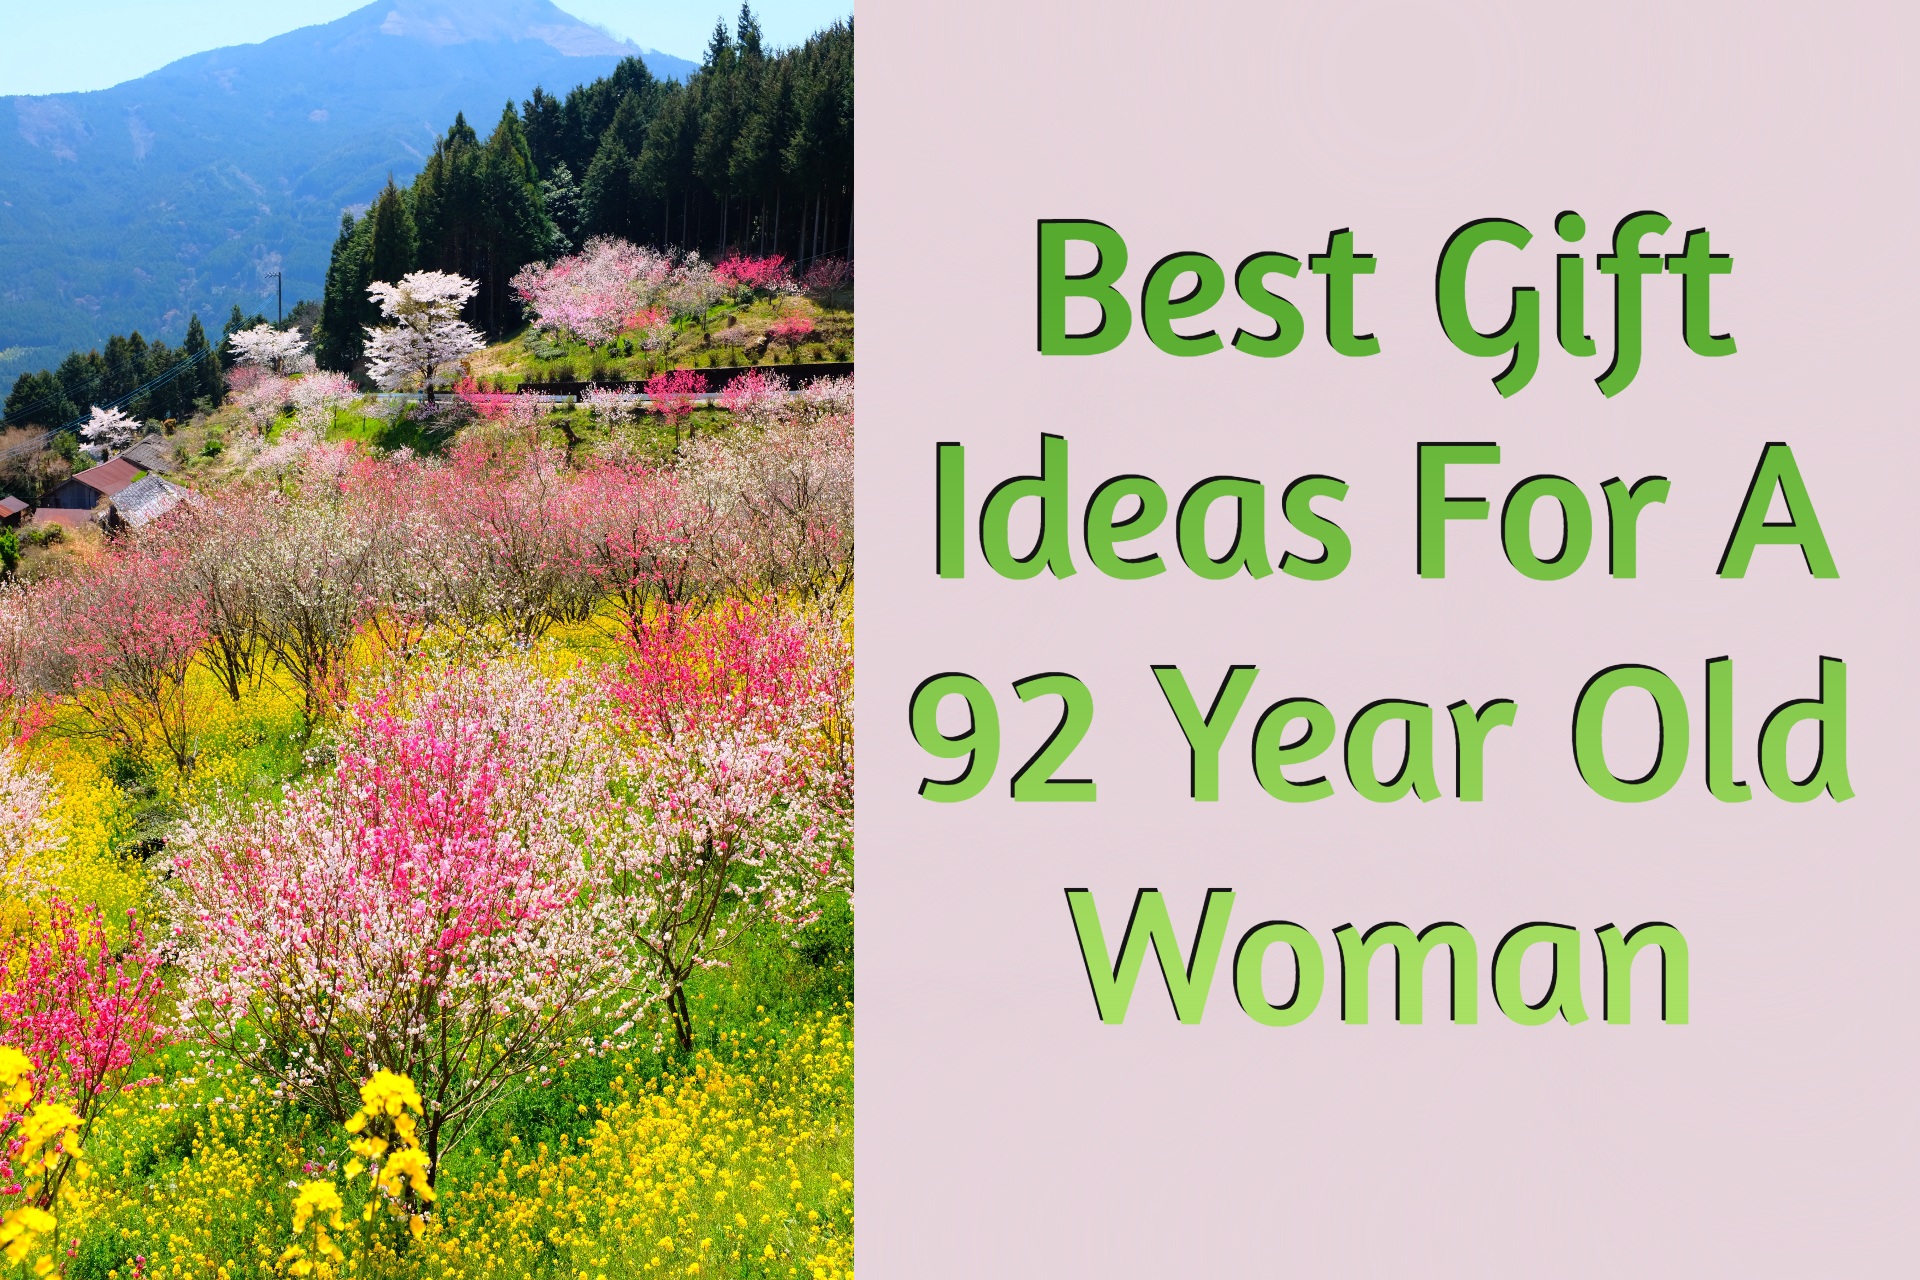 Cover image of gift ideas for 92-year-old woman by Giftsedge